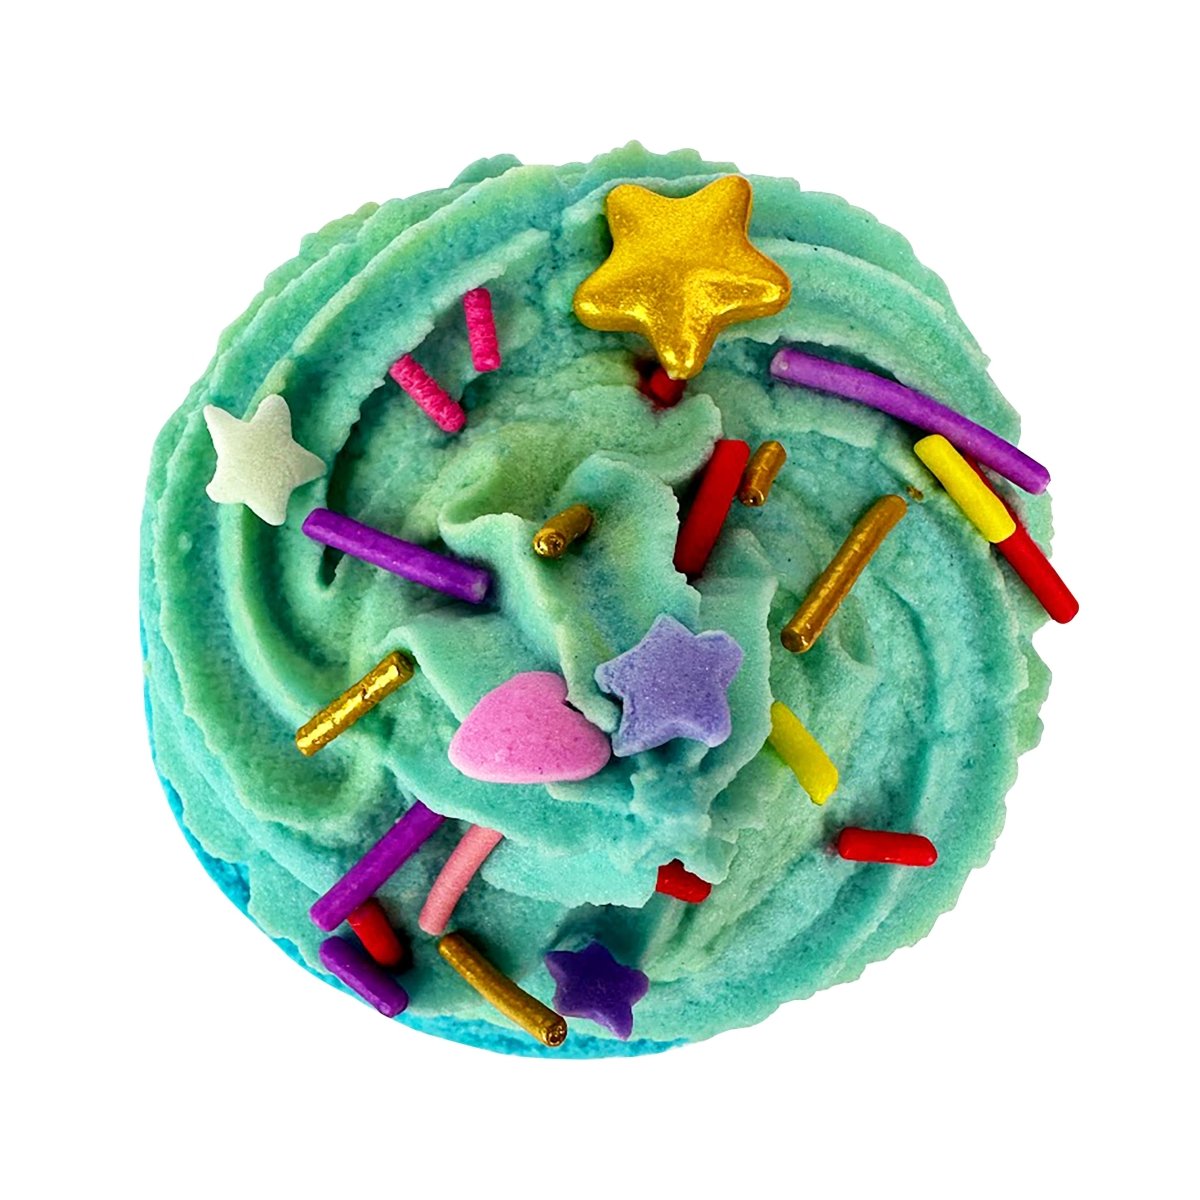 Carnival Cupcake Bath Bomb for Kids & Adults - Large & Colourful With Blueberry Fragrance - Made in Australia by Bath Box